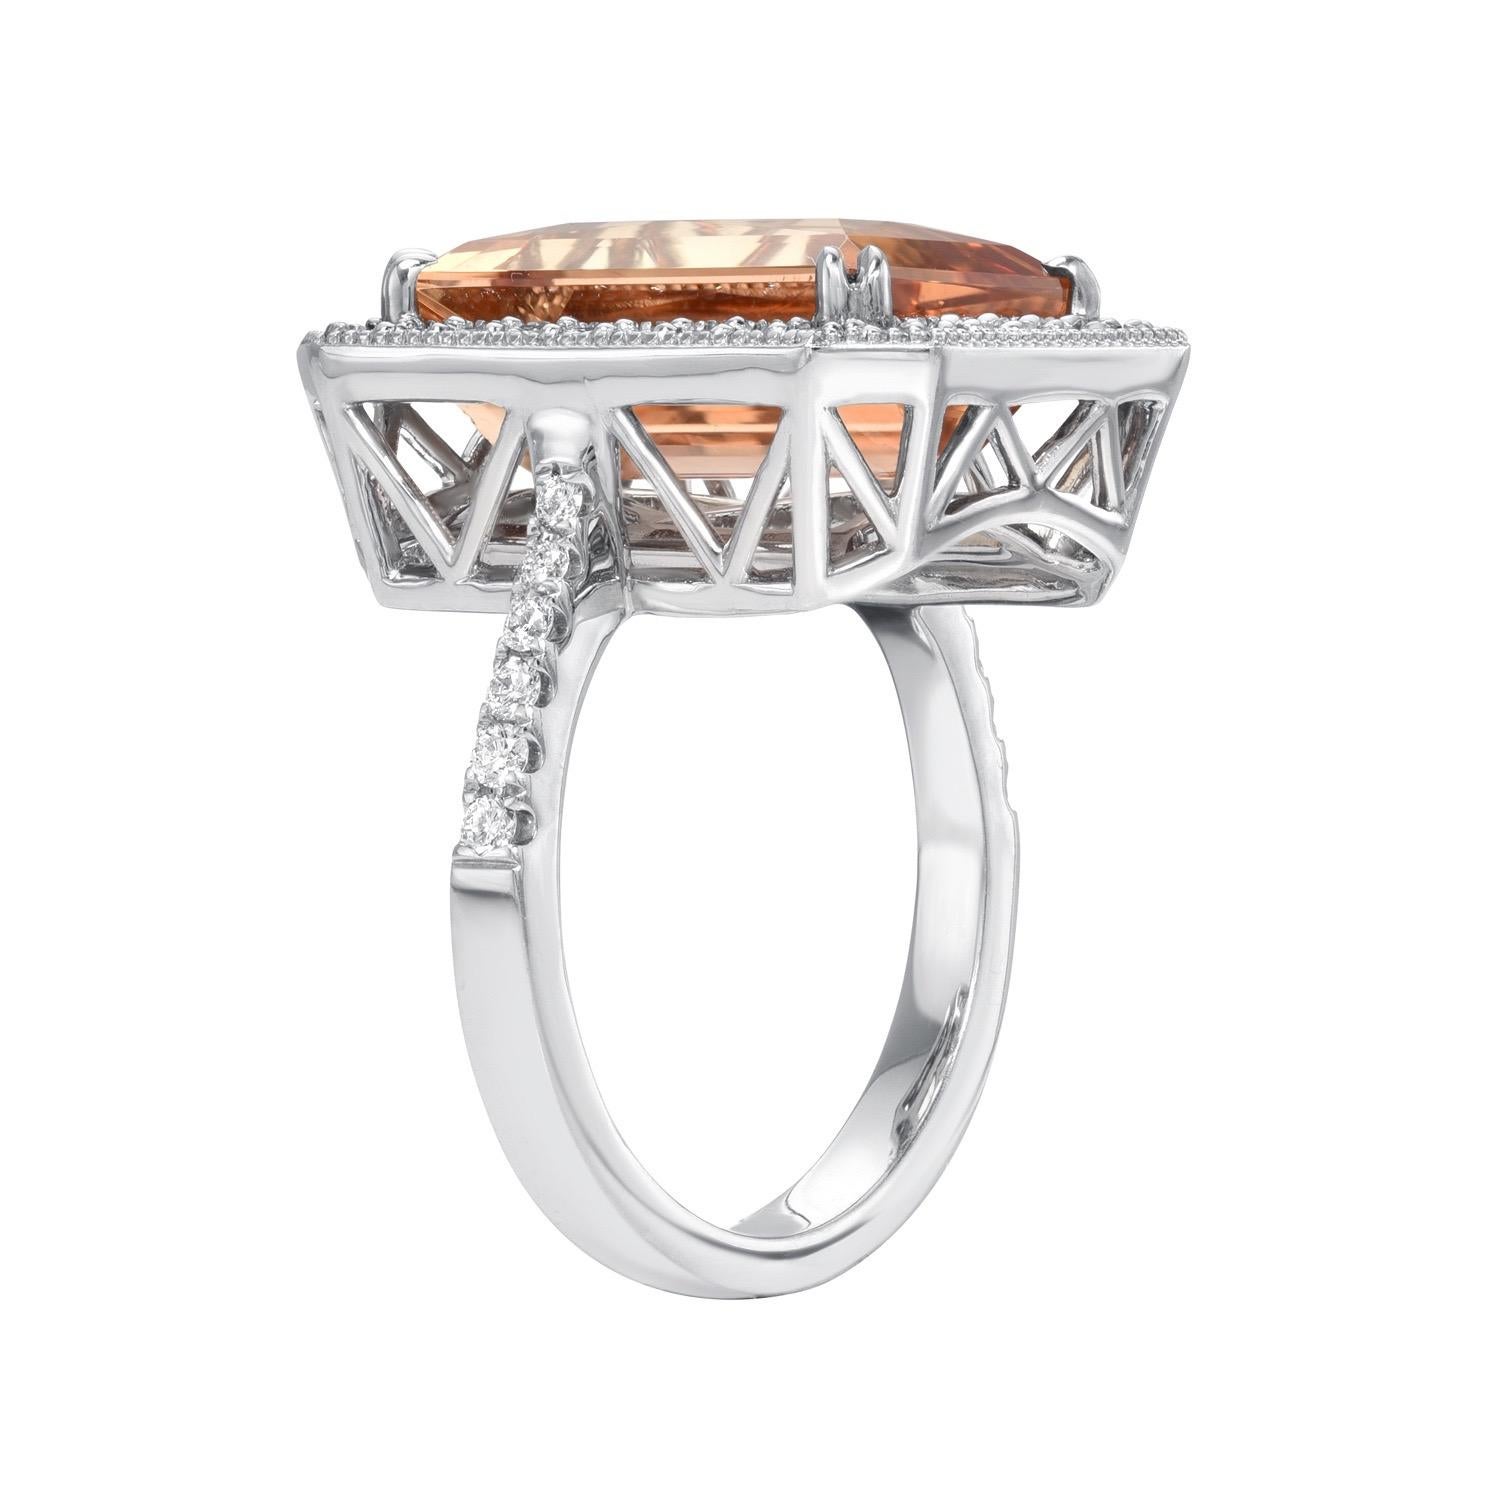 Impressive 8.91 carat Precious Topaz emerald-cut, set in an attractive 0.60 carat total diamond, 18K white gold ring.
Ring size 6.5. Resizing is complimentary upon request.
Returns are accepted and paid by us within 7 days of delivery.

Please